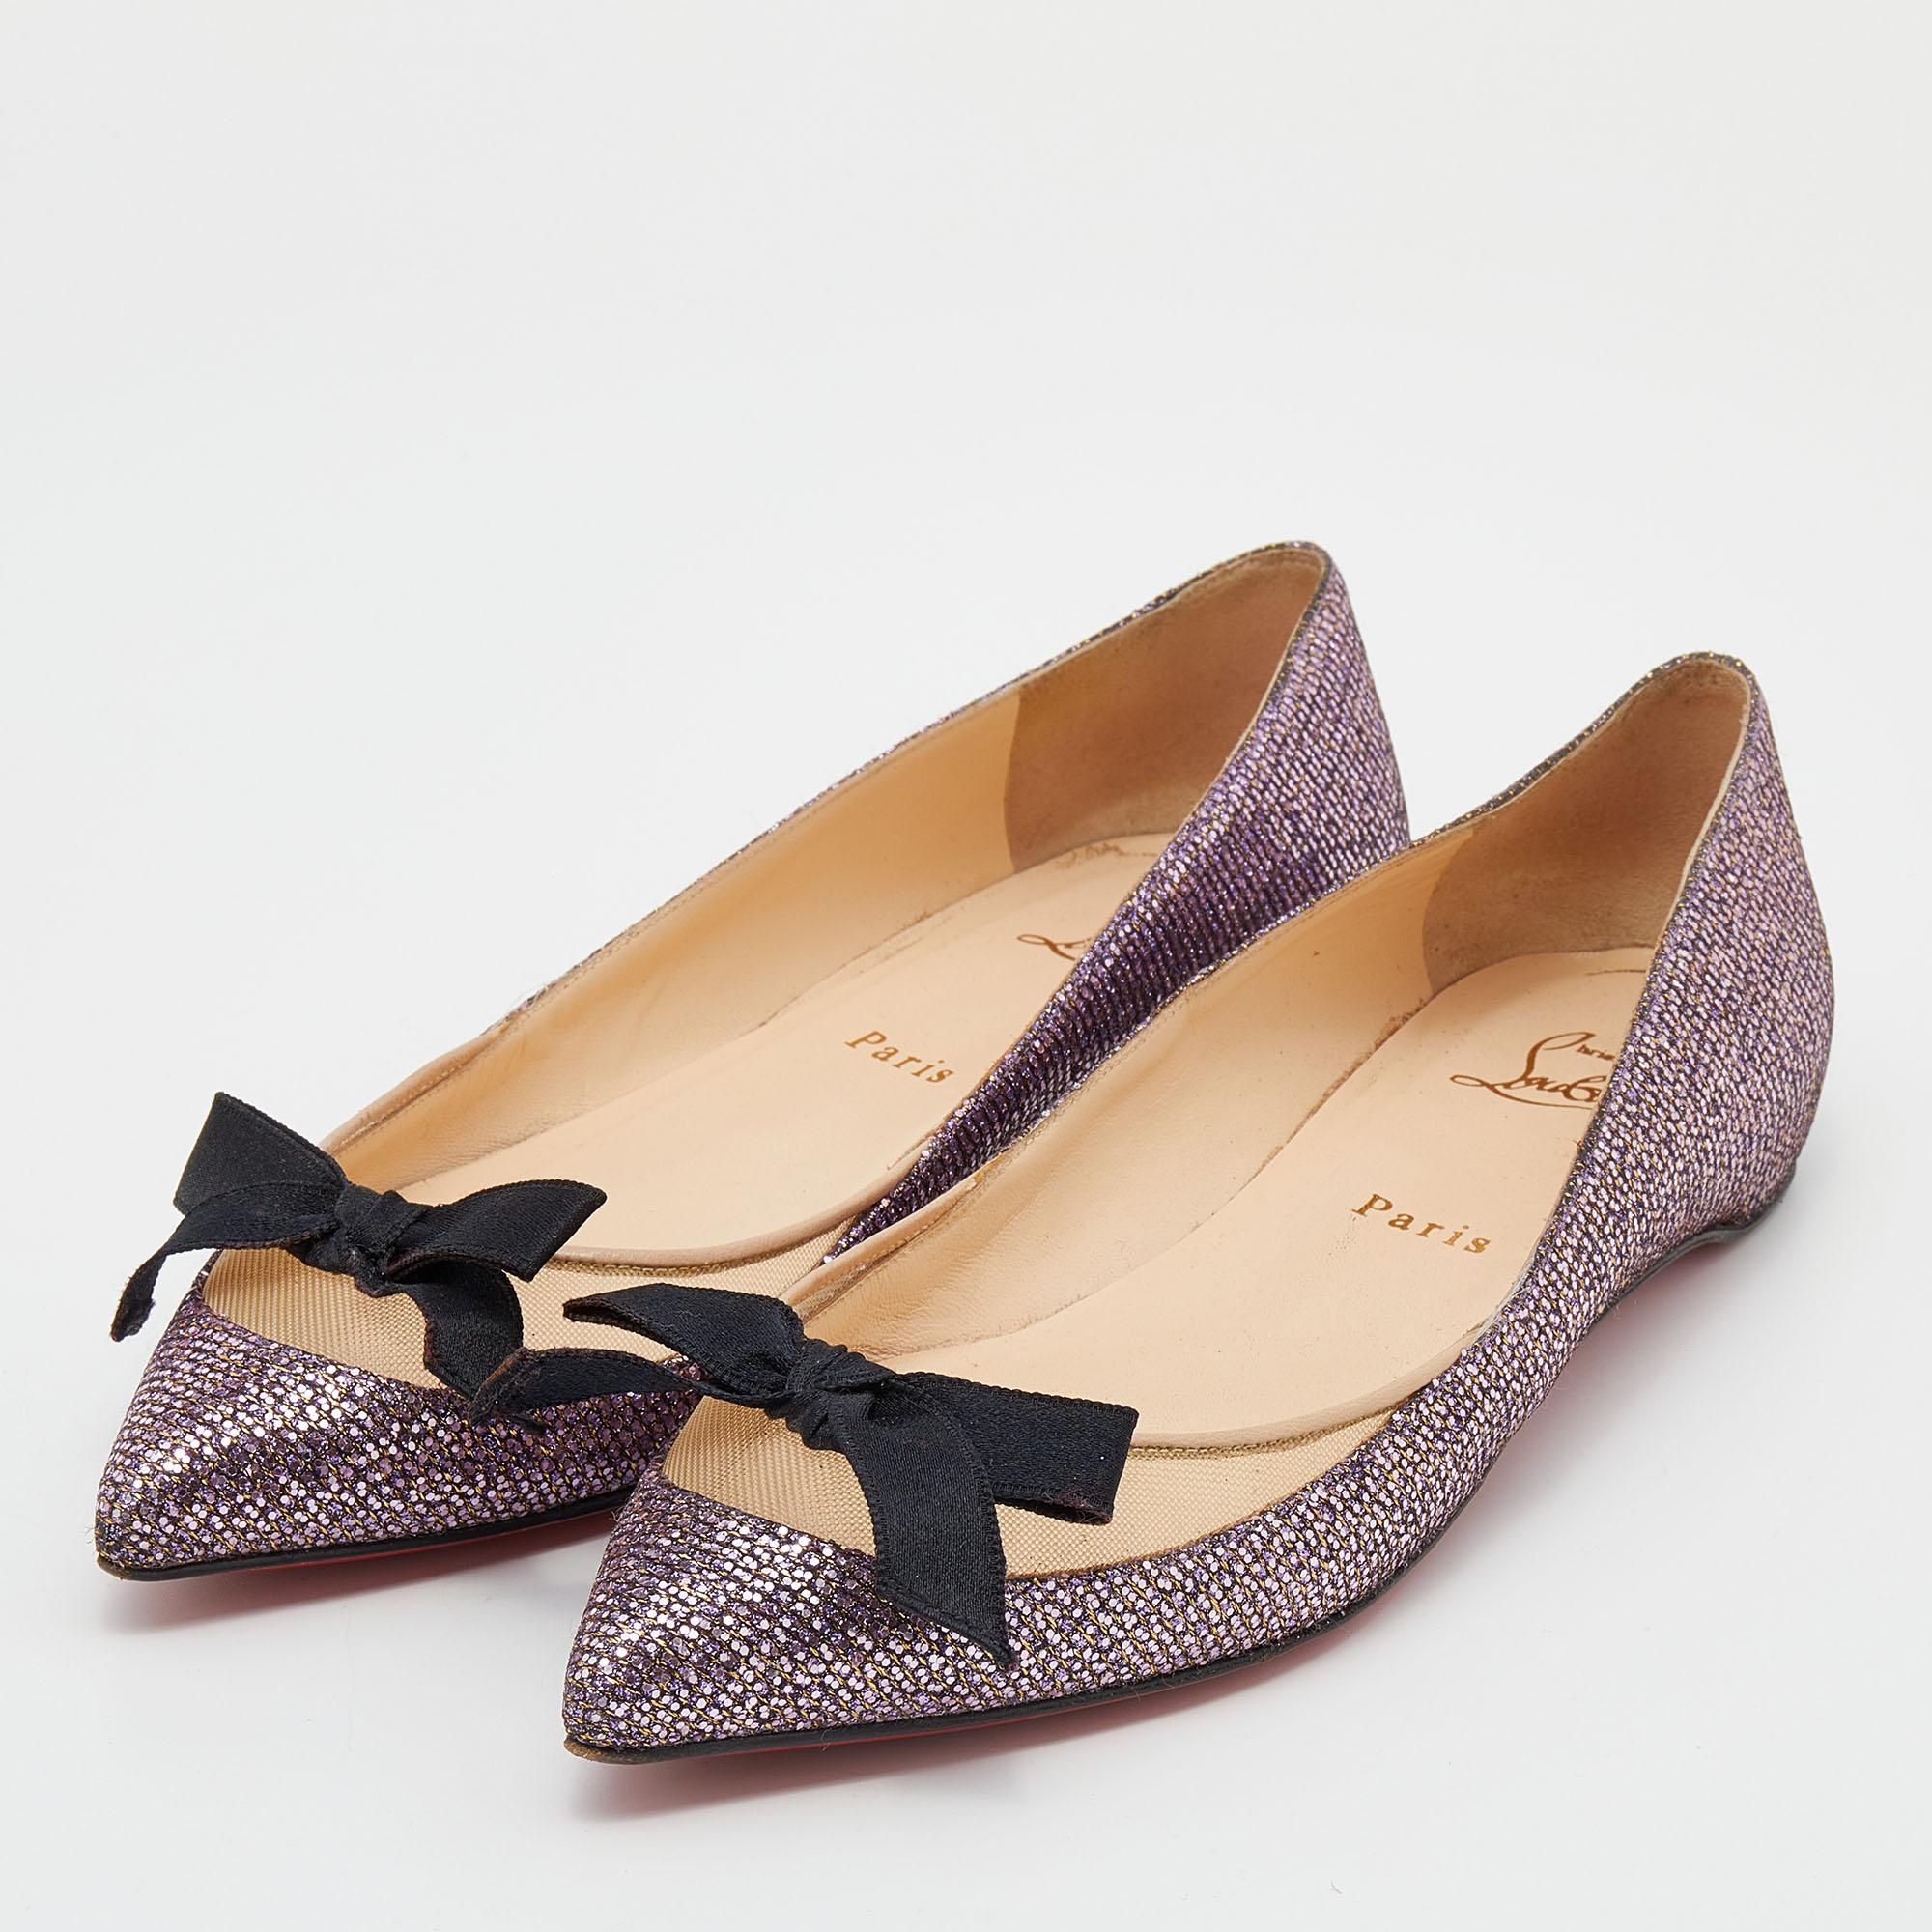 Lend your ensemble a sparkling addition with these Christian Louboutin flats. Made from glitter, it features a cute bow on the vamps, low heels, and a slip-on fitting.

